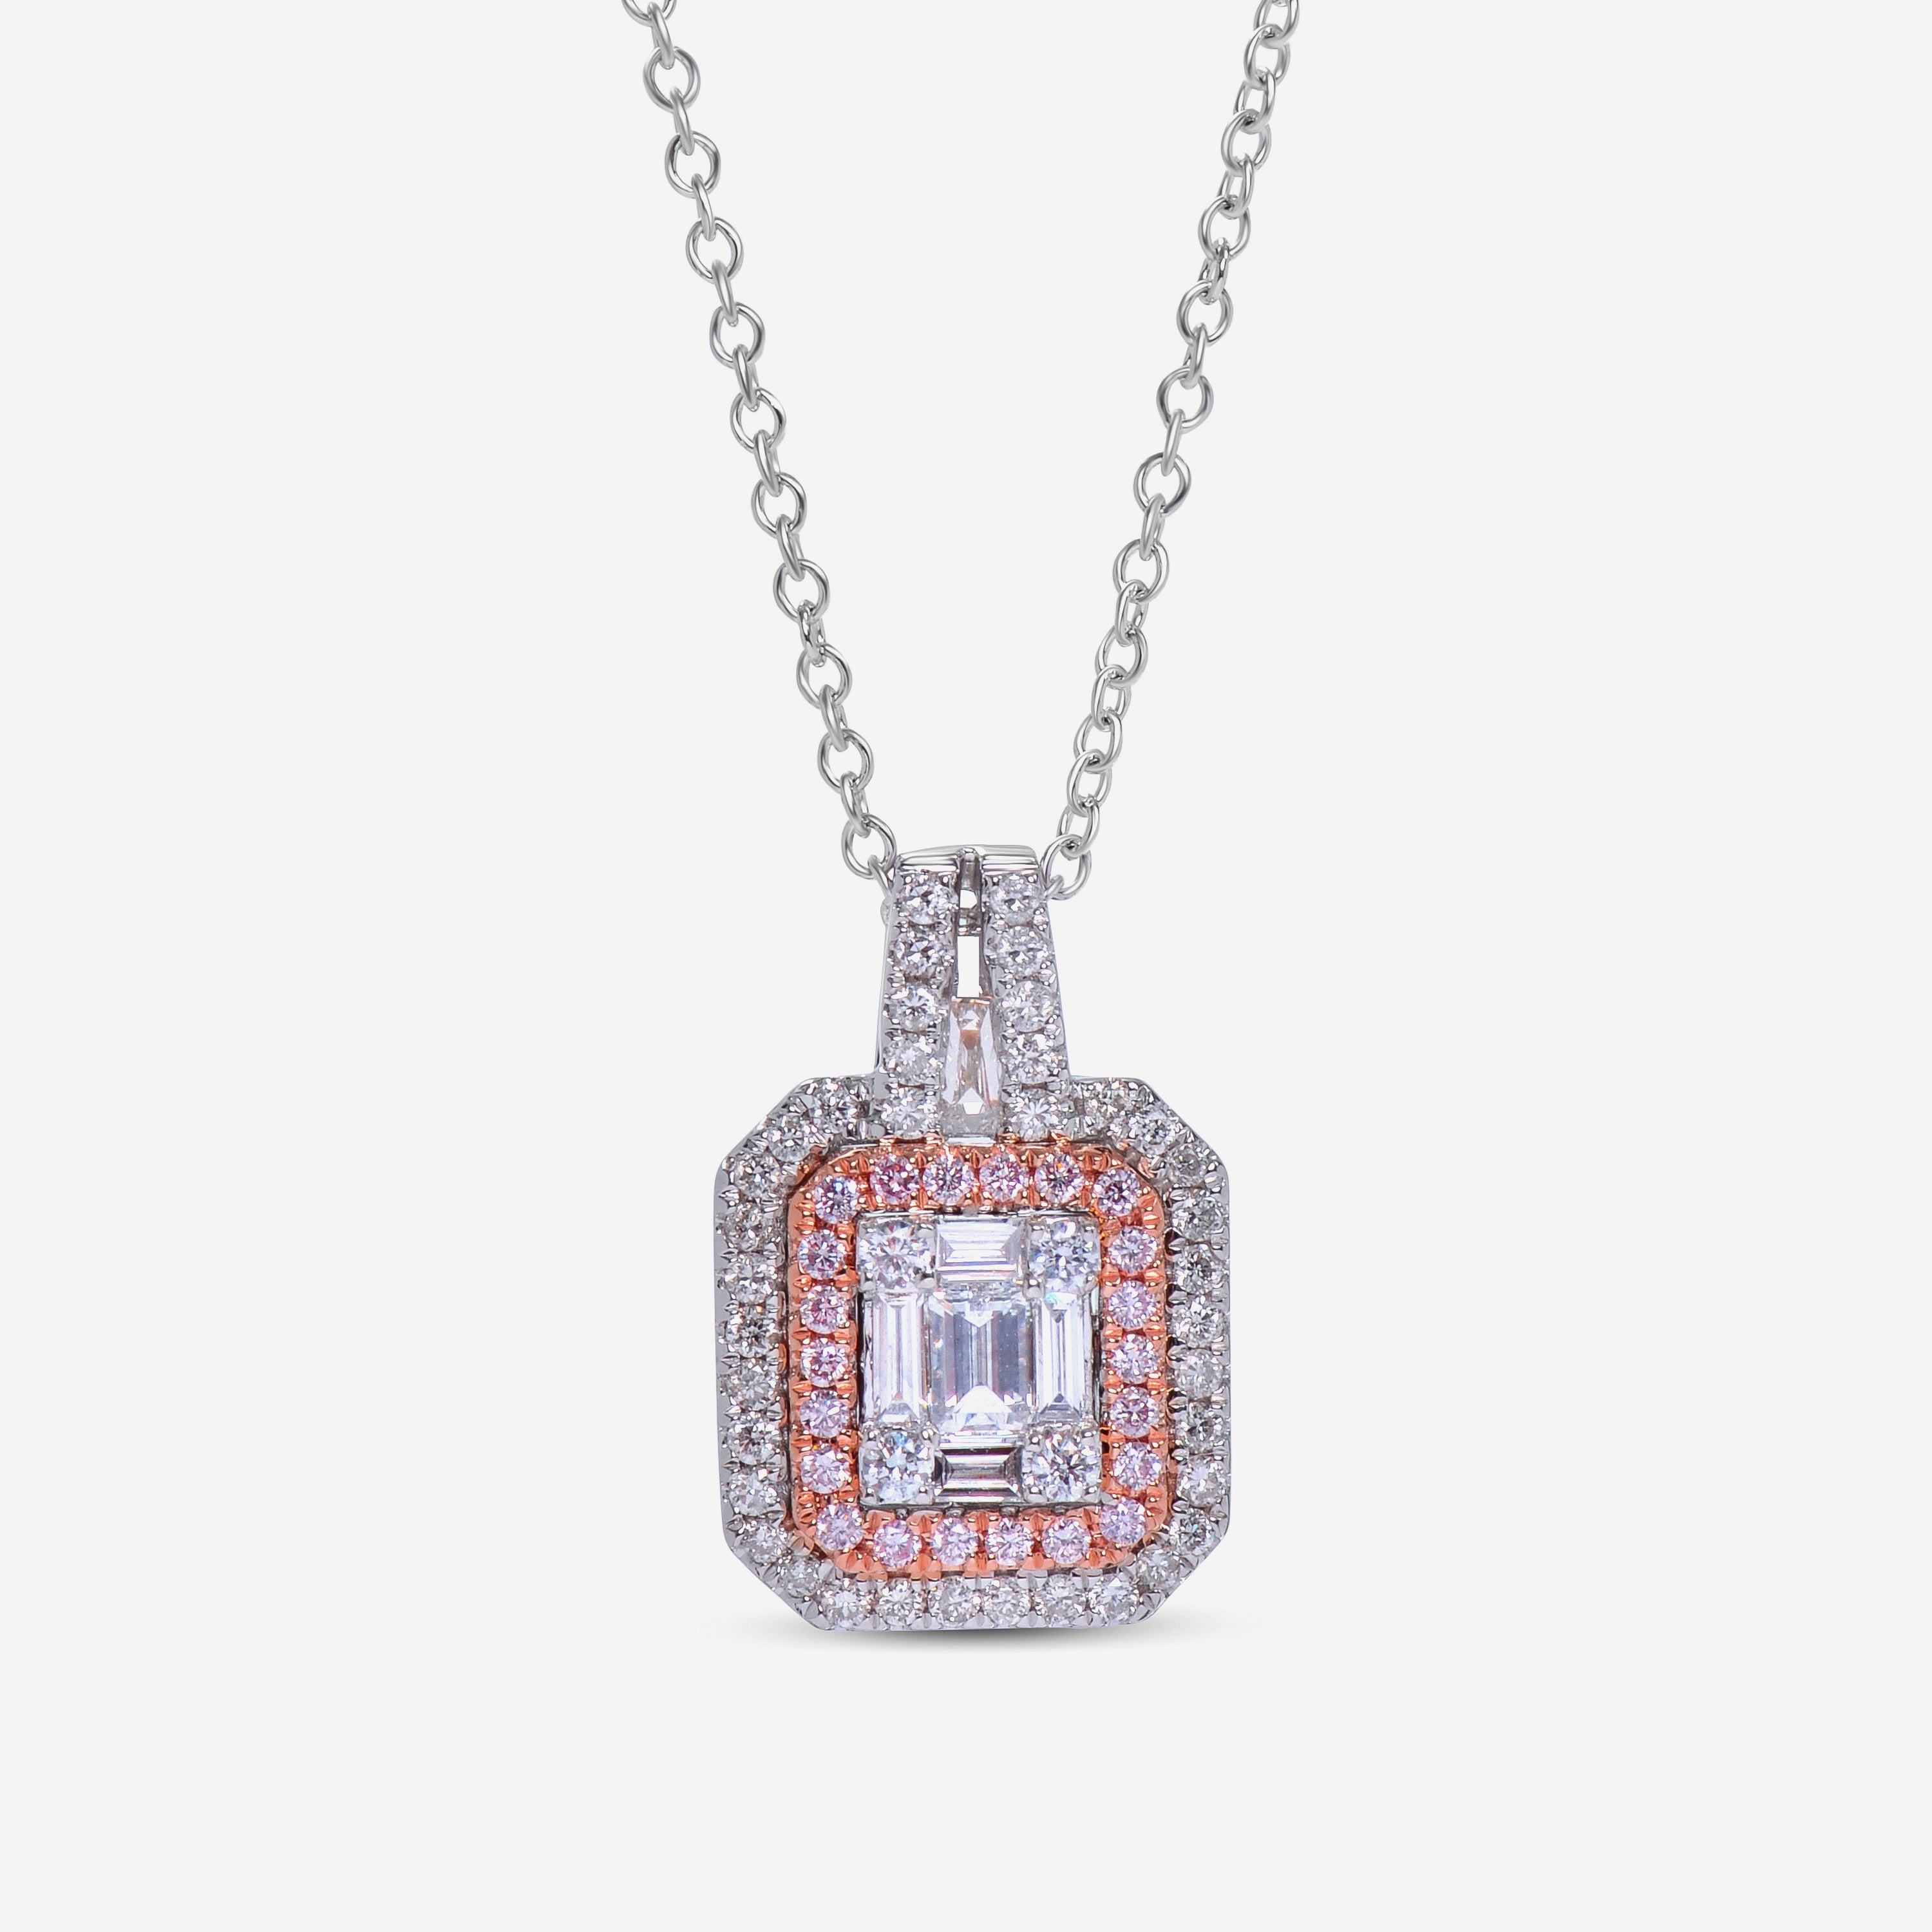 Gregg Ruth 14K Gold, White Diamond 0.51ct. tw. and Pink Diamond Pendant Necklace 45699 - THE SOLIST